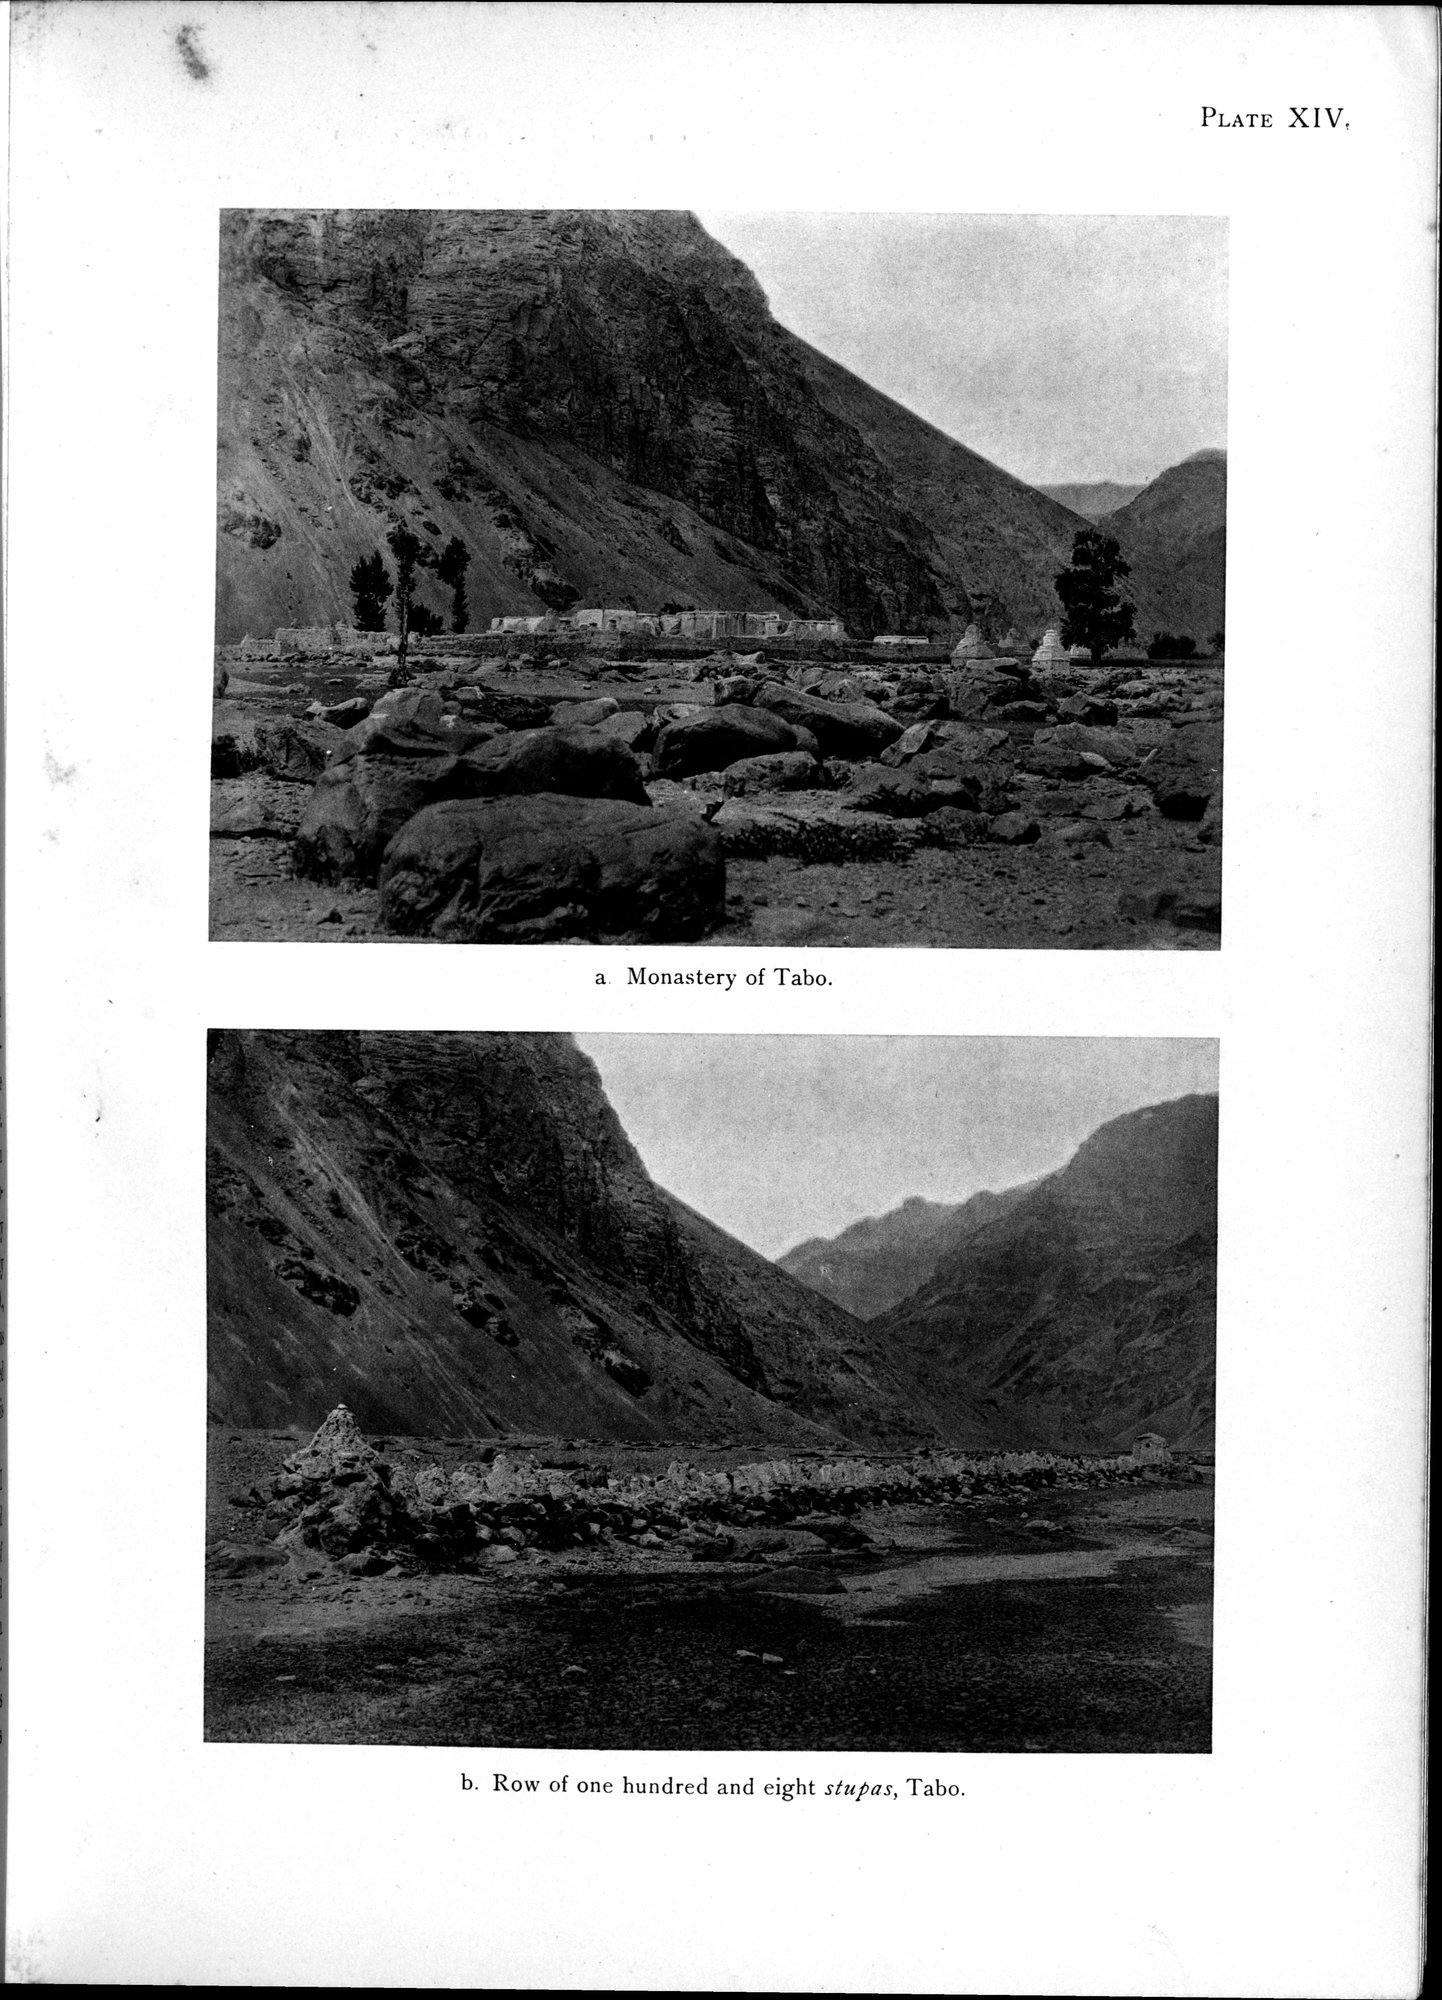 Antiquities of Indian Tibet : vol.1 / Page 85 (Grayscale High Resolution Image)